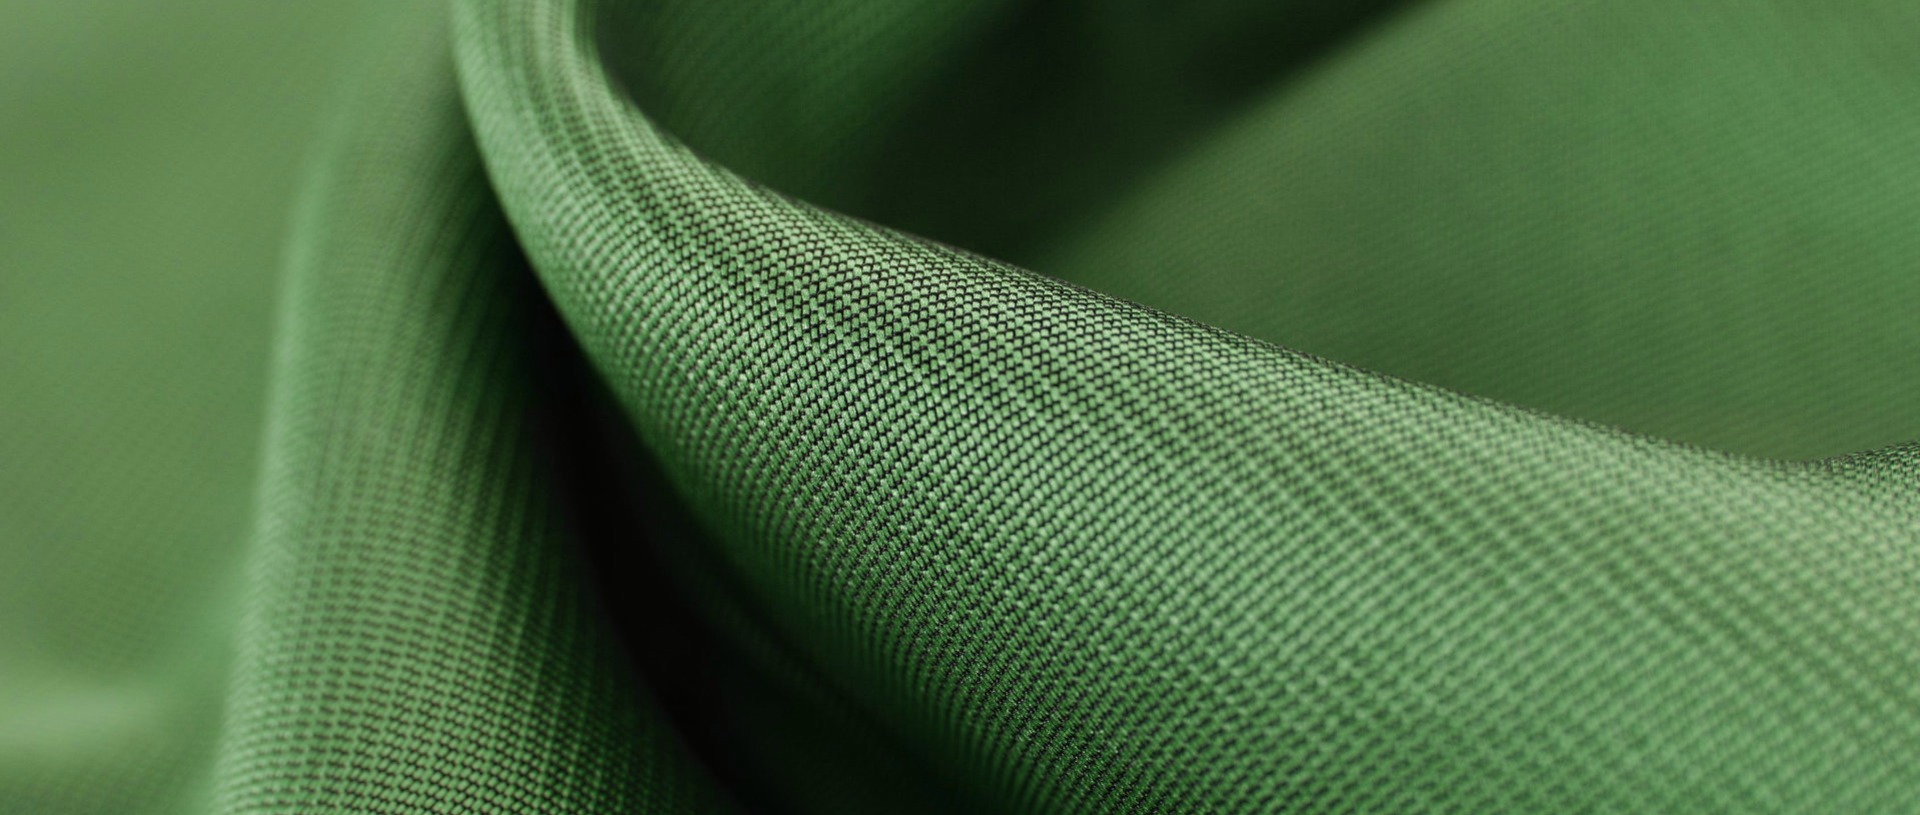 Technical fabrics and textiles for every industry